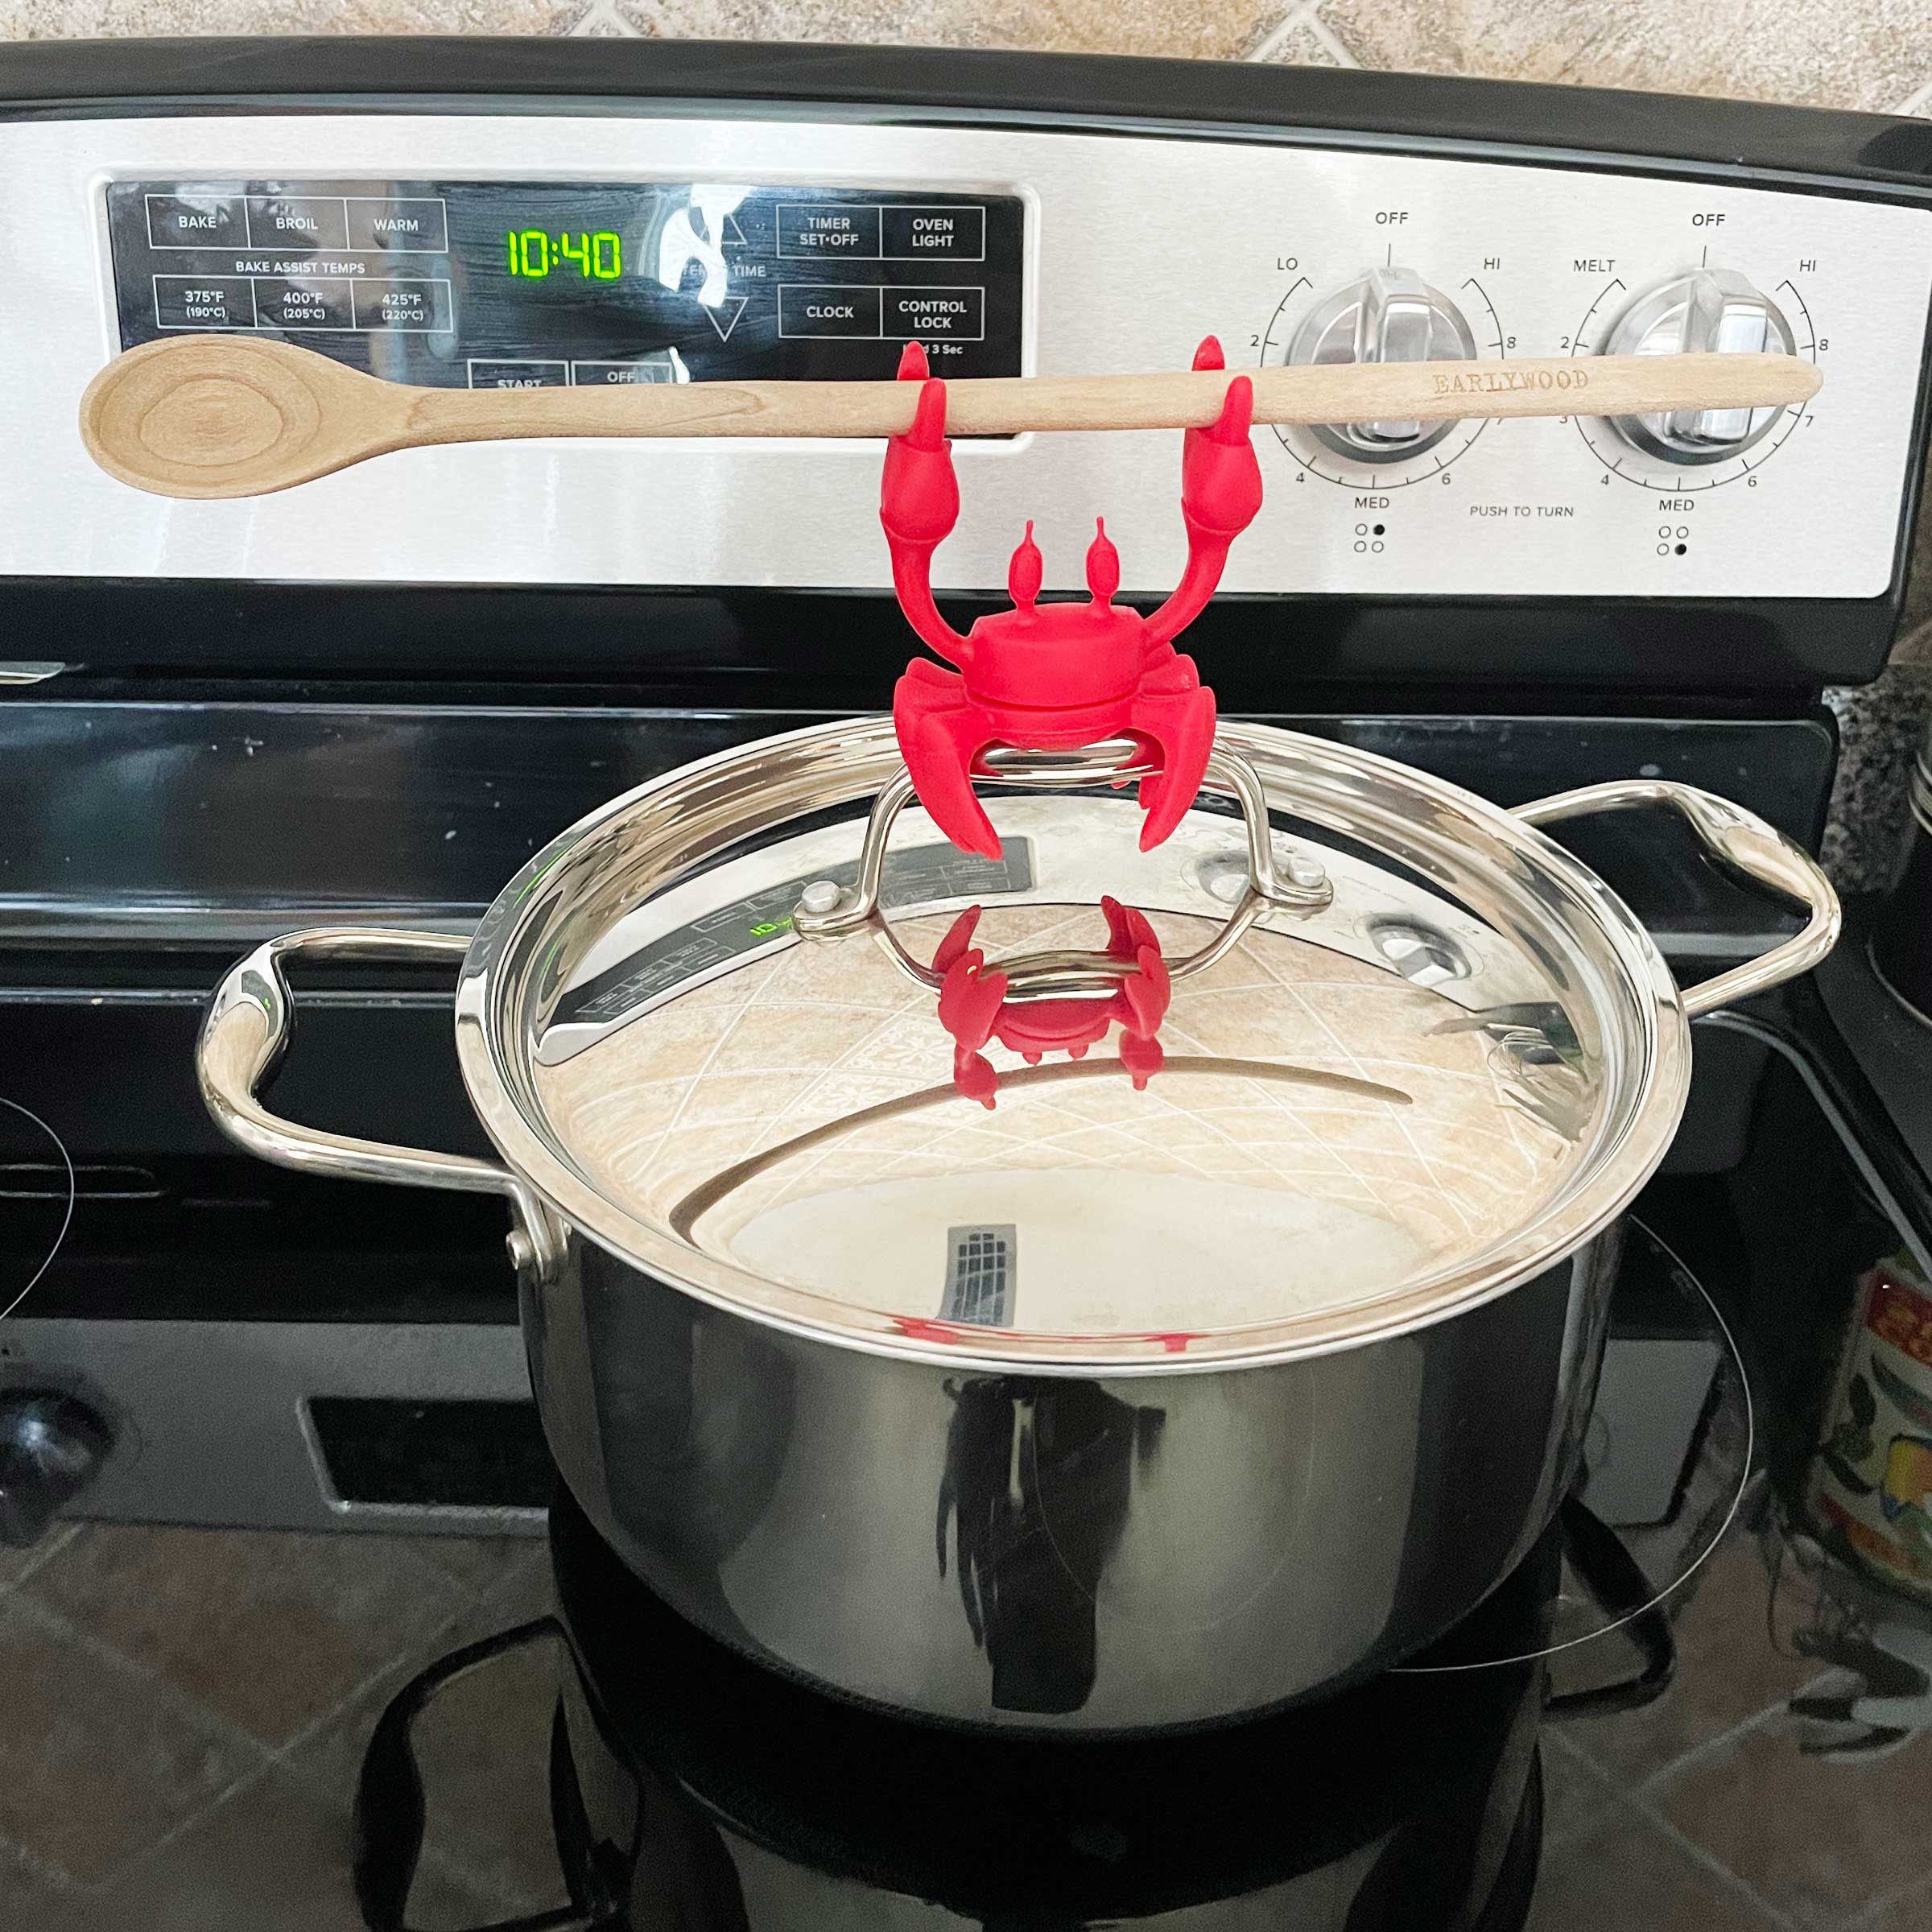  Crab Spoon Rest & Steam Releaser, Silicone Spoon Rest